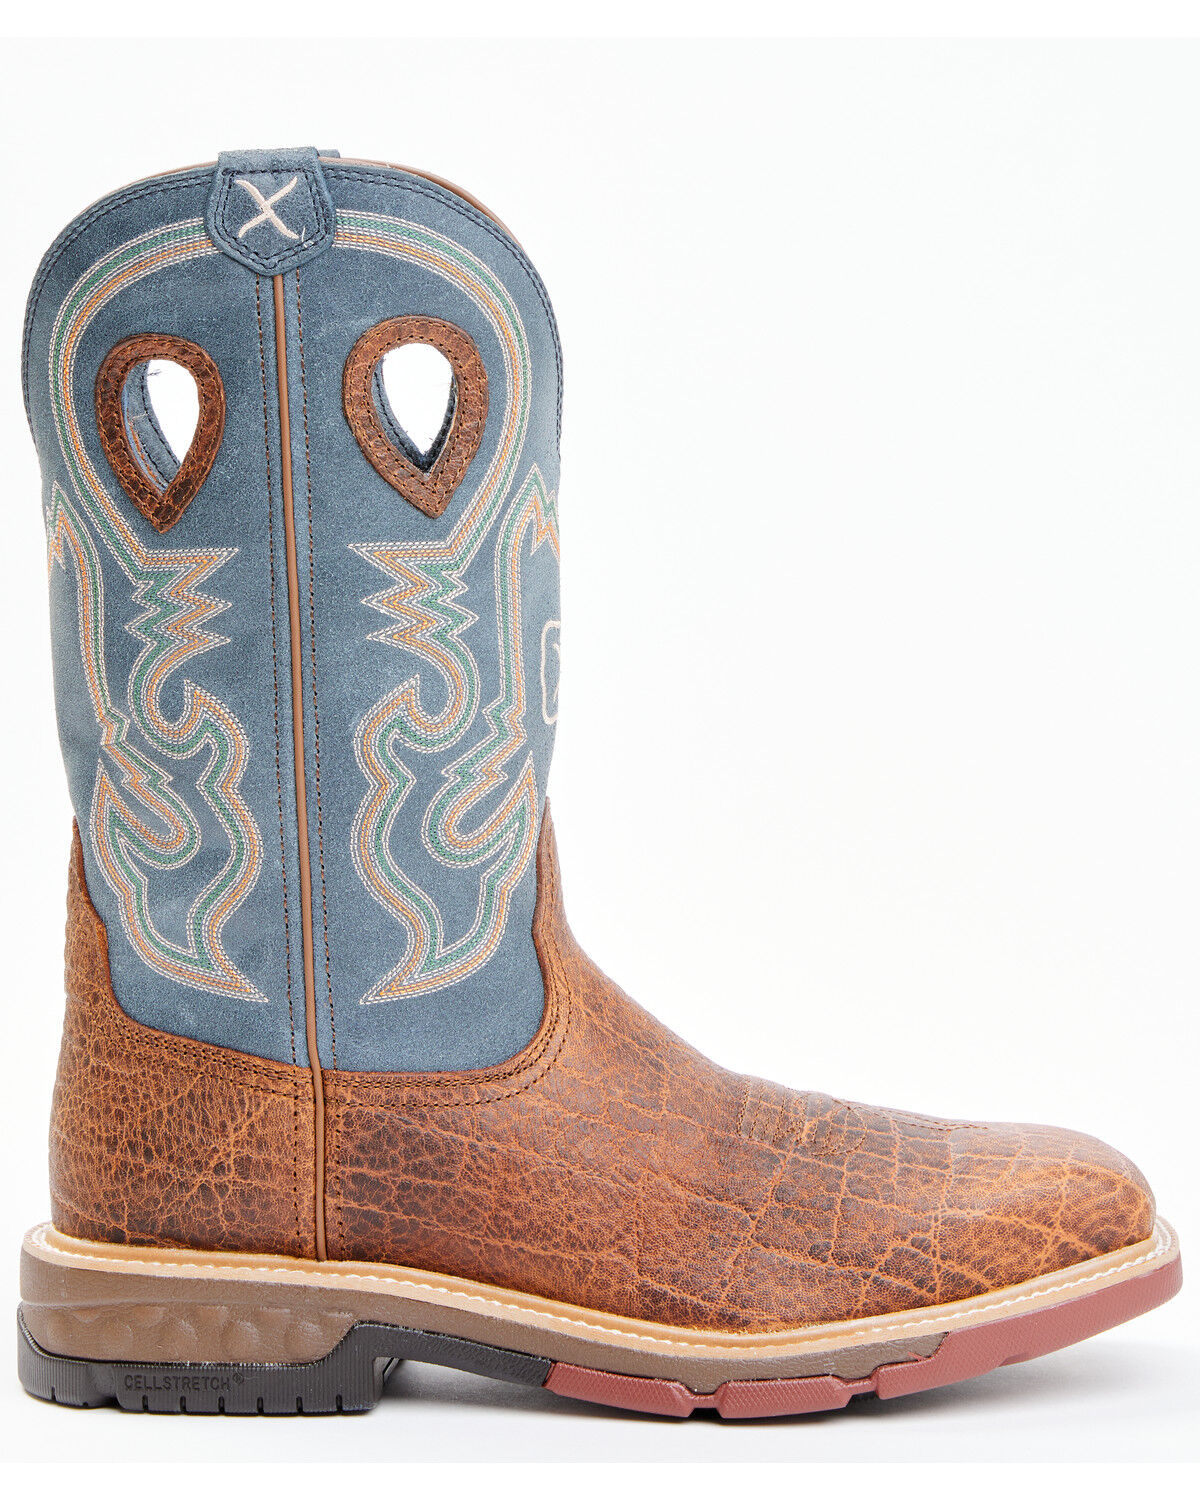 Men's 10 A Twisted X blue /brown Roper style Western cowboy boots 